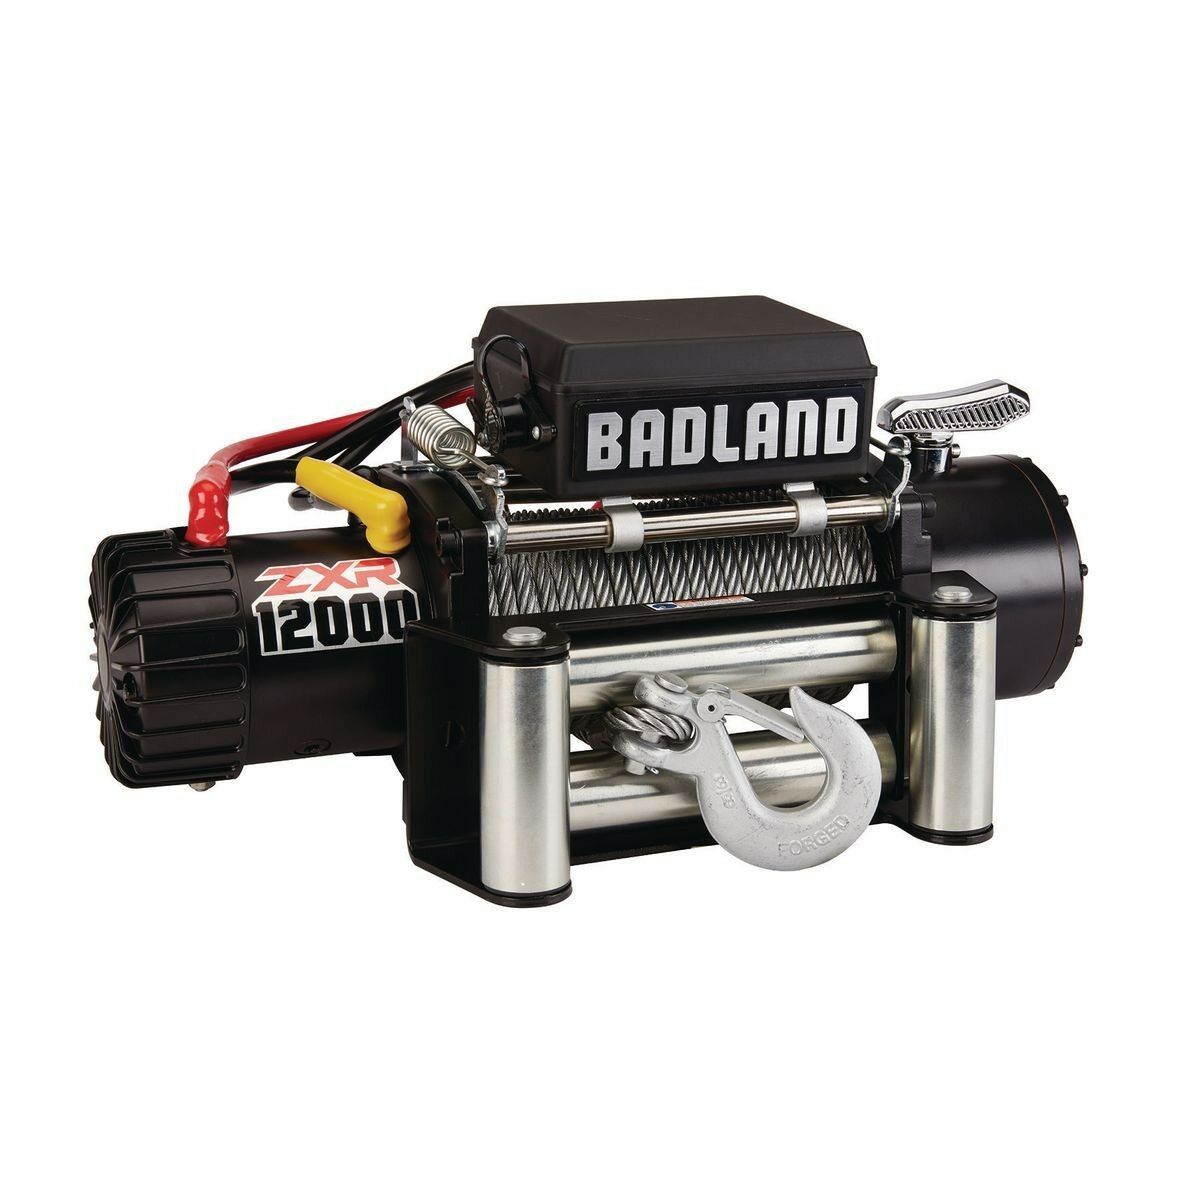 Badland 12000 lb OffRoad Vehicle Electric Winch & Automatic Load